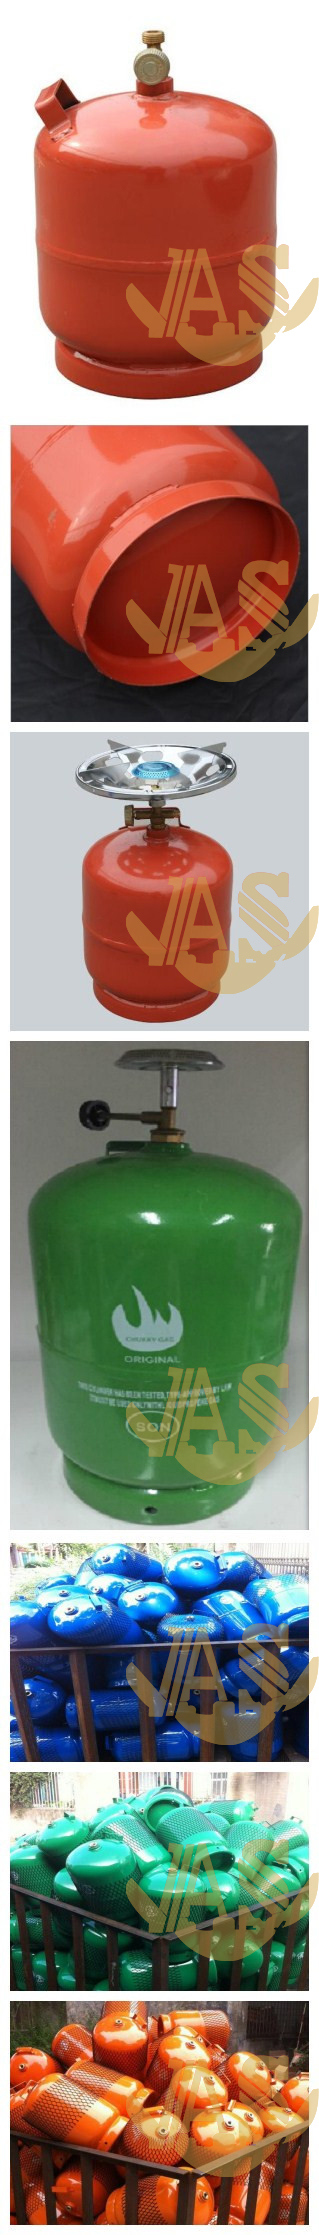 Modern Kitchen Home Cooking Use Gas Cylinder